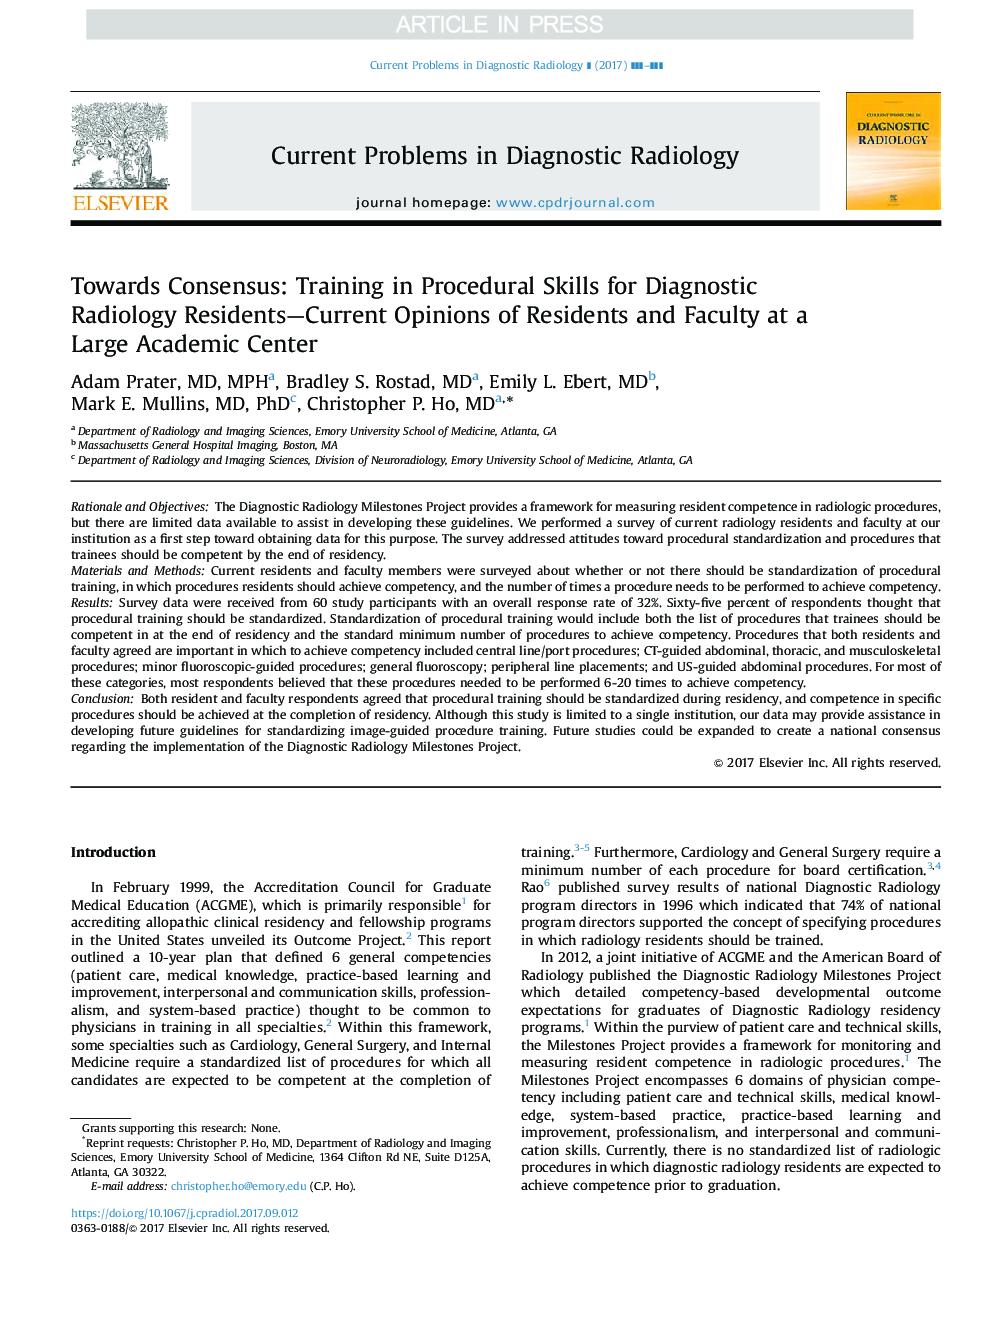 Towards Consensus: Training in Procedural Skills for Diagnostic Radiology Residents-Current Opinions of Residents and Faculty at a Large Academic Center